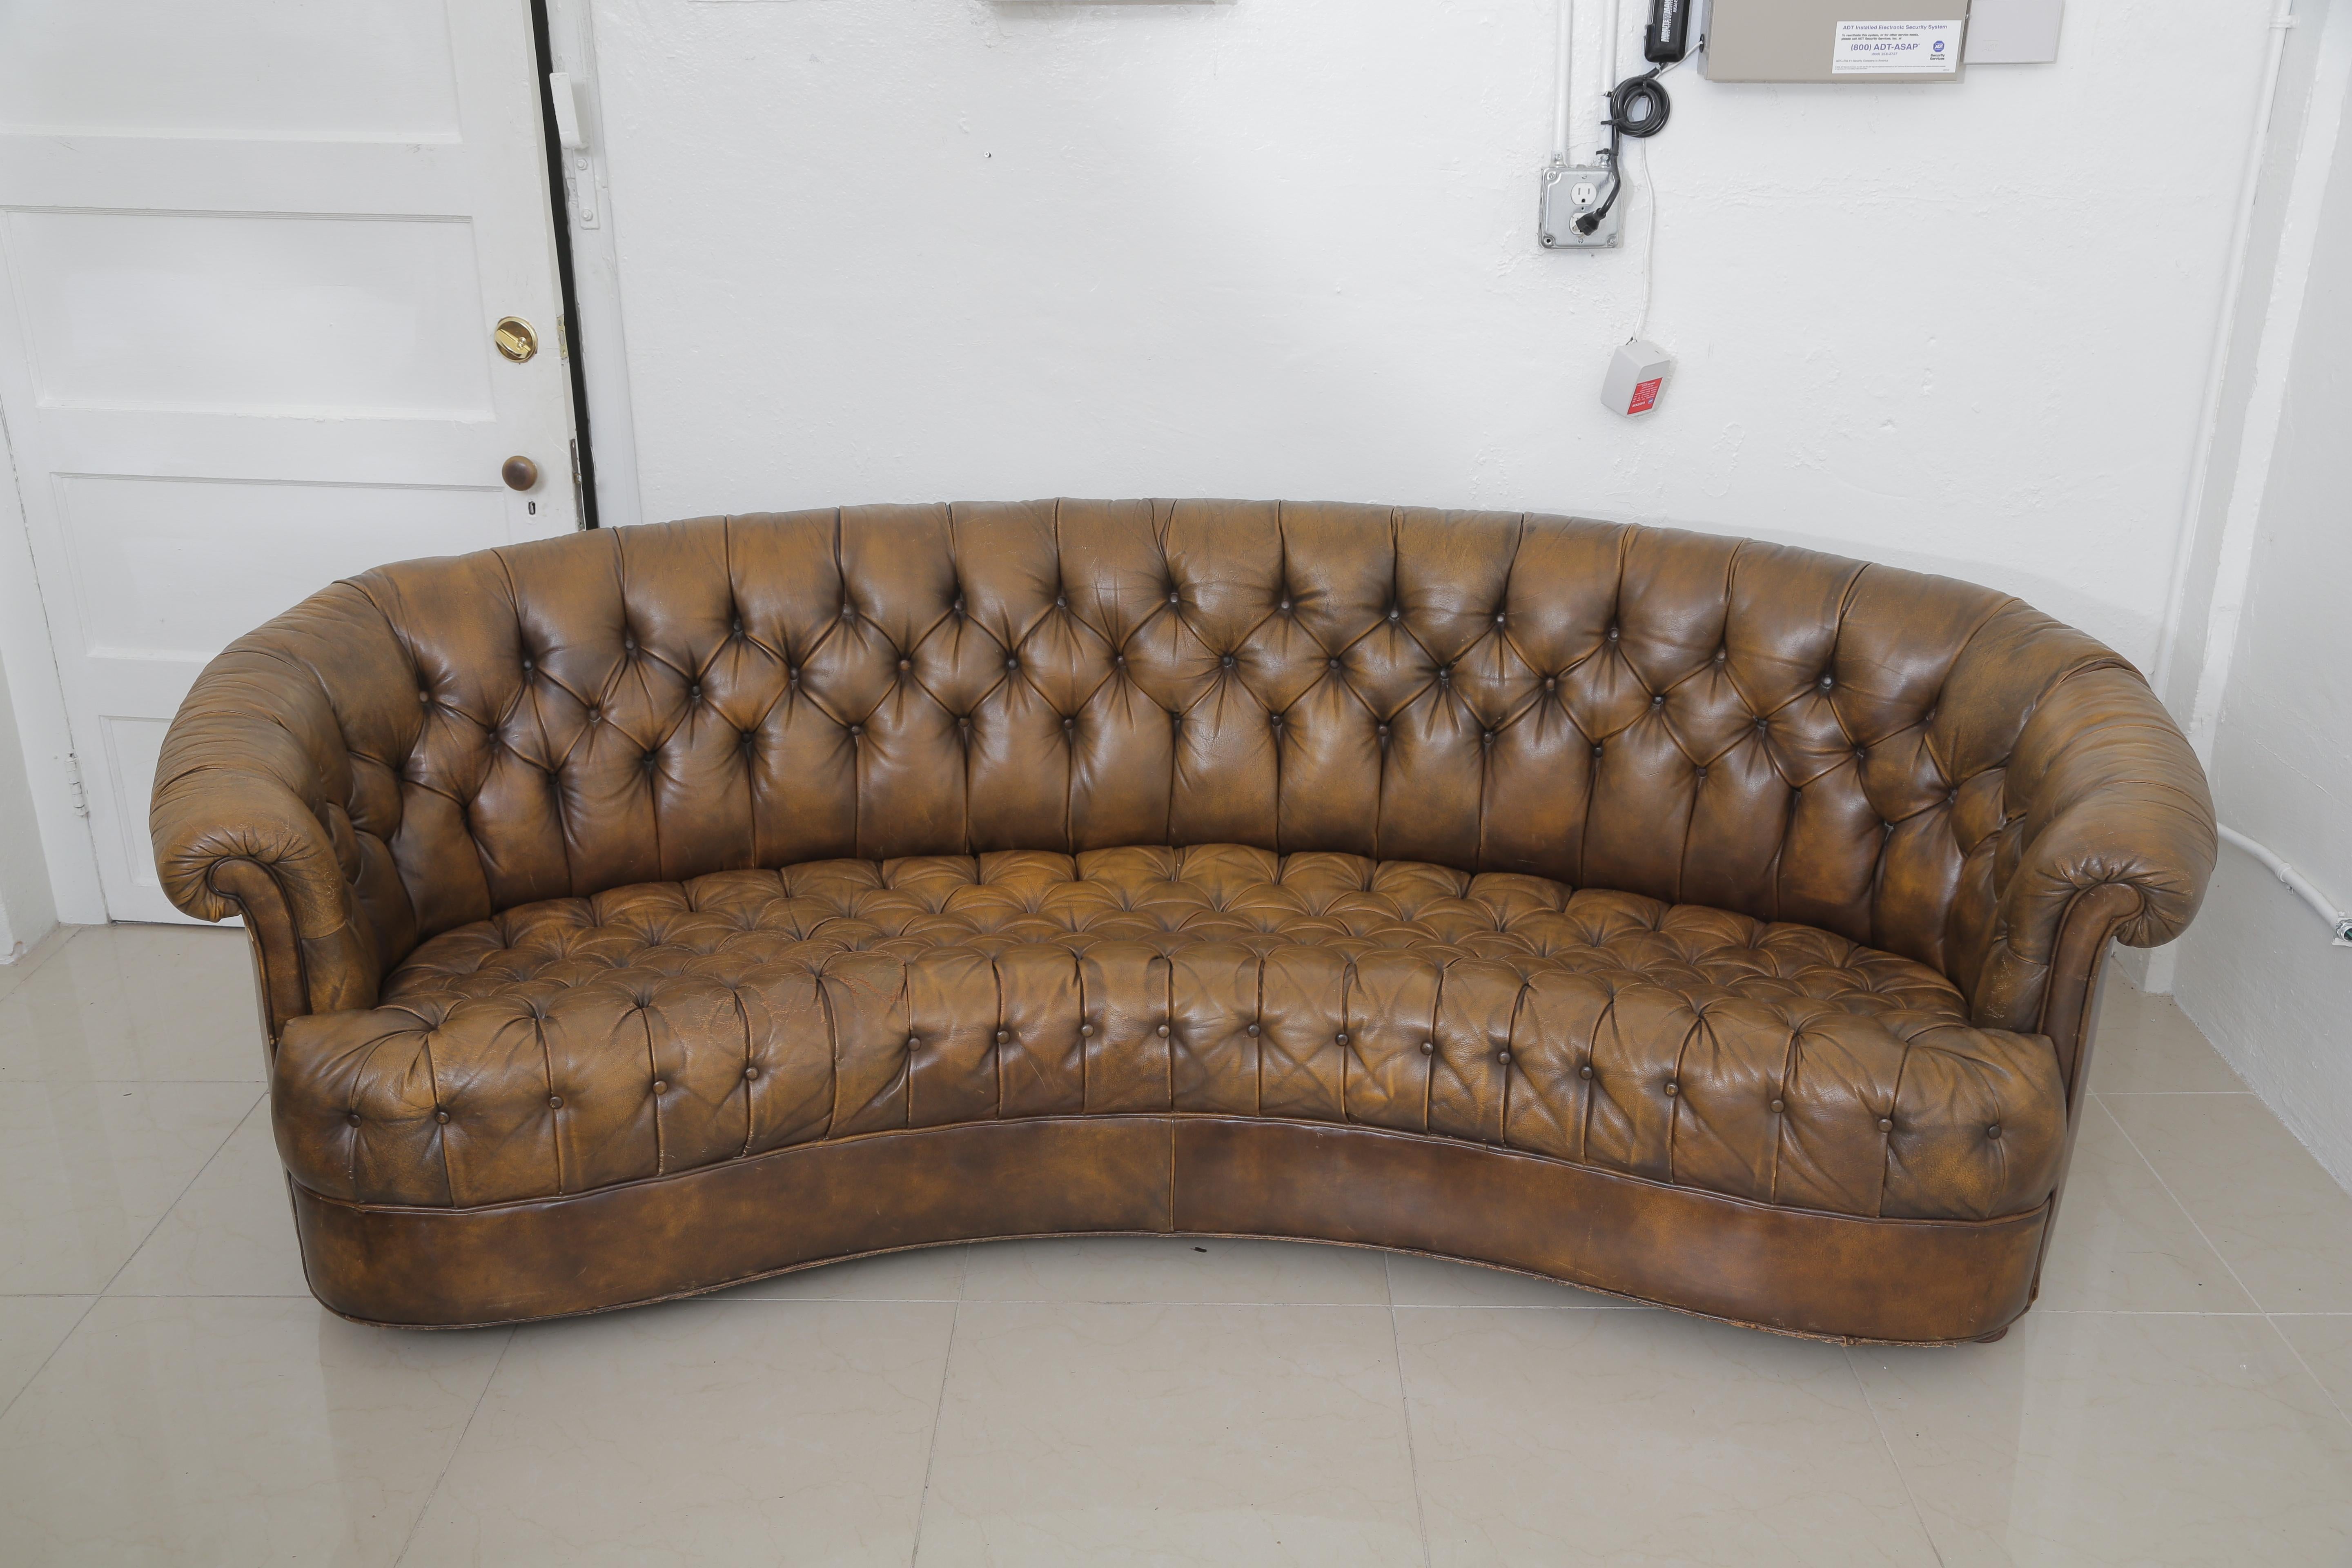 Vintage chesterfield leather sofa and chair on wheels.